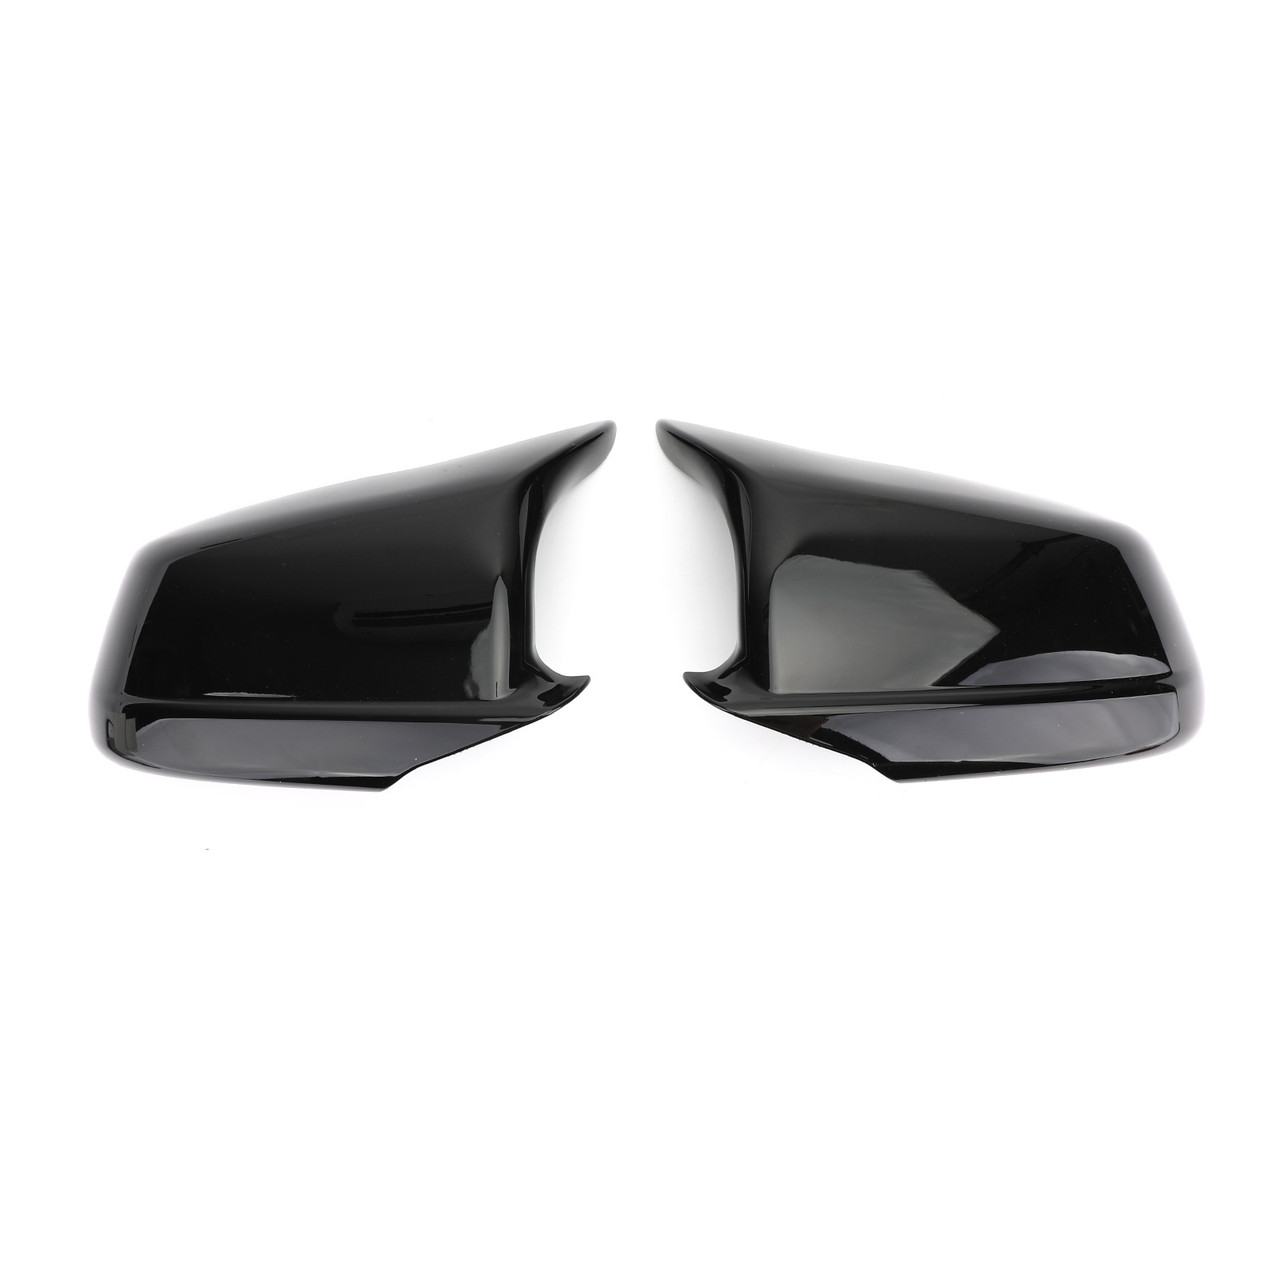 Door Side Wing Mirror Cover Cap Black For BMW 5 Series F10/F11/F18 Pre-LCI 11-13